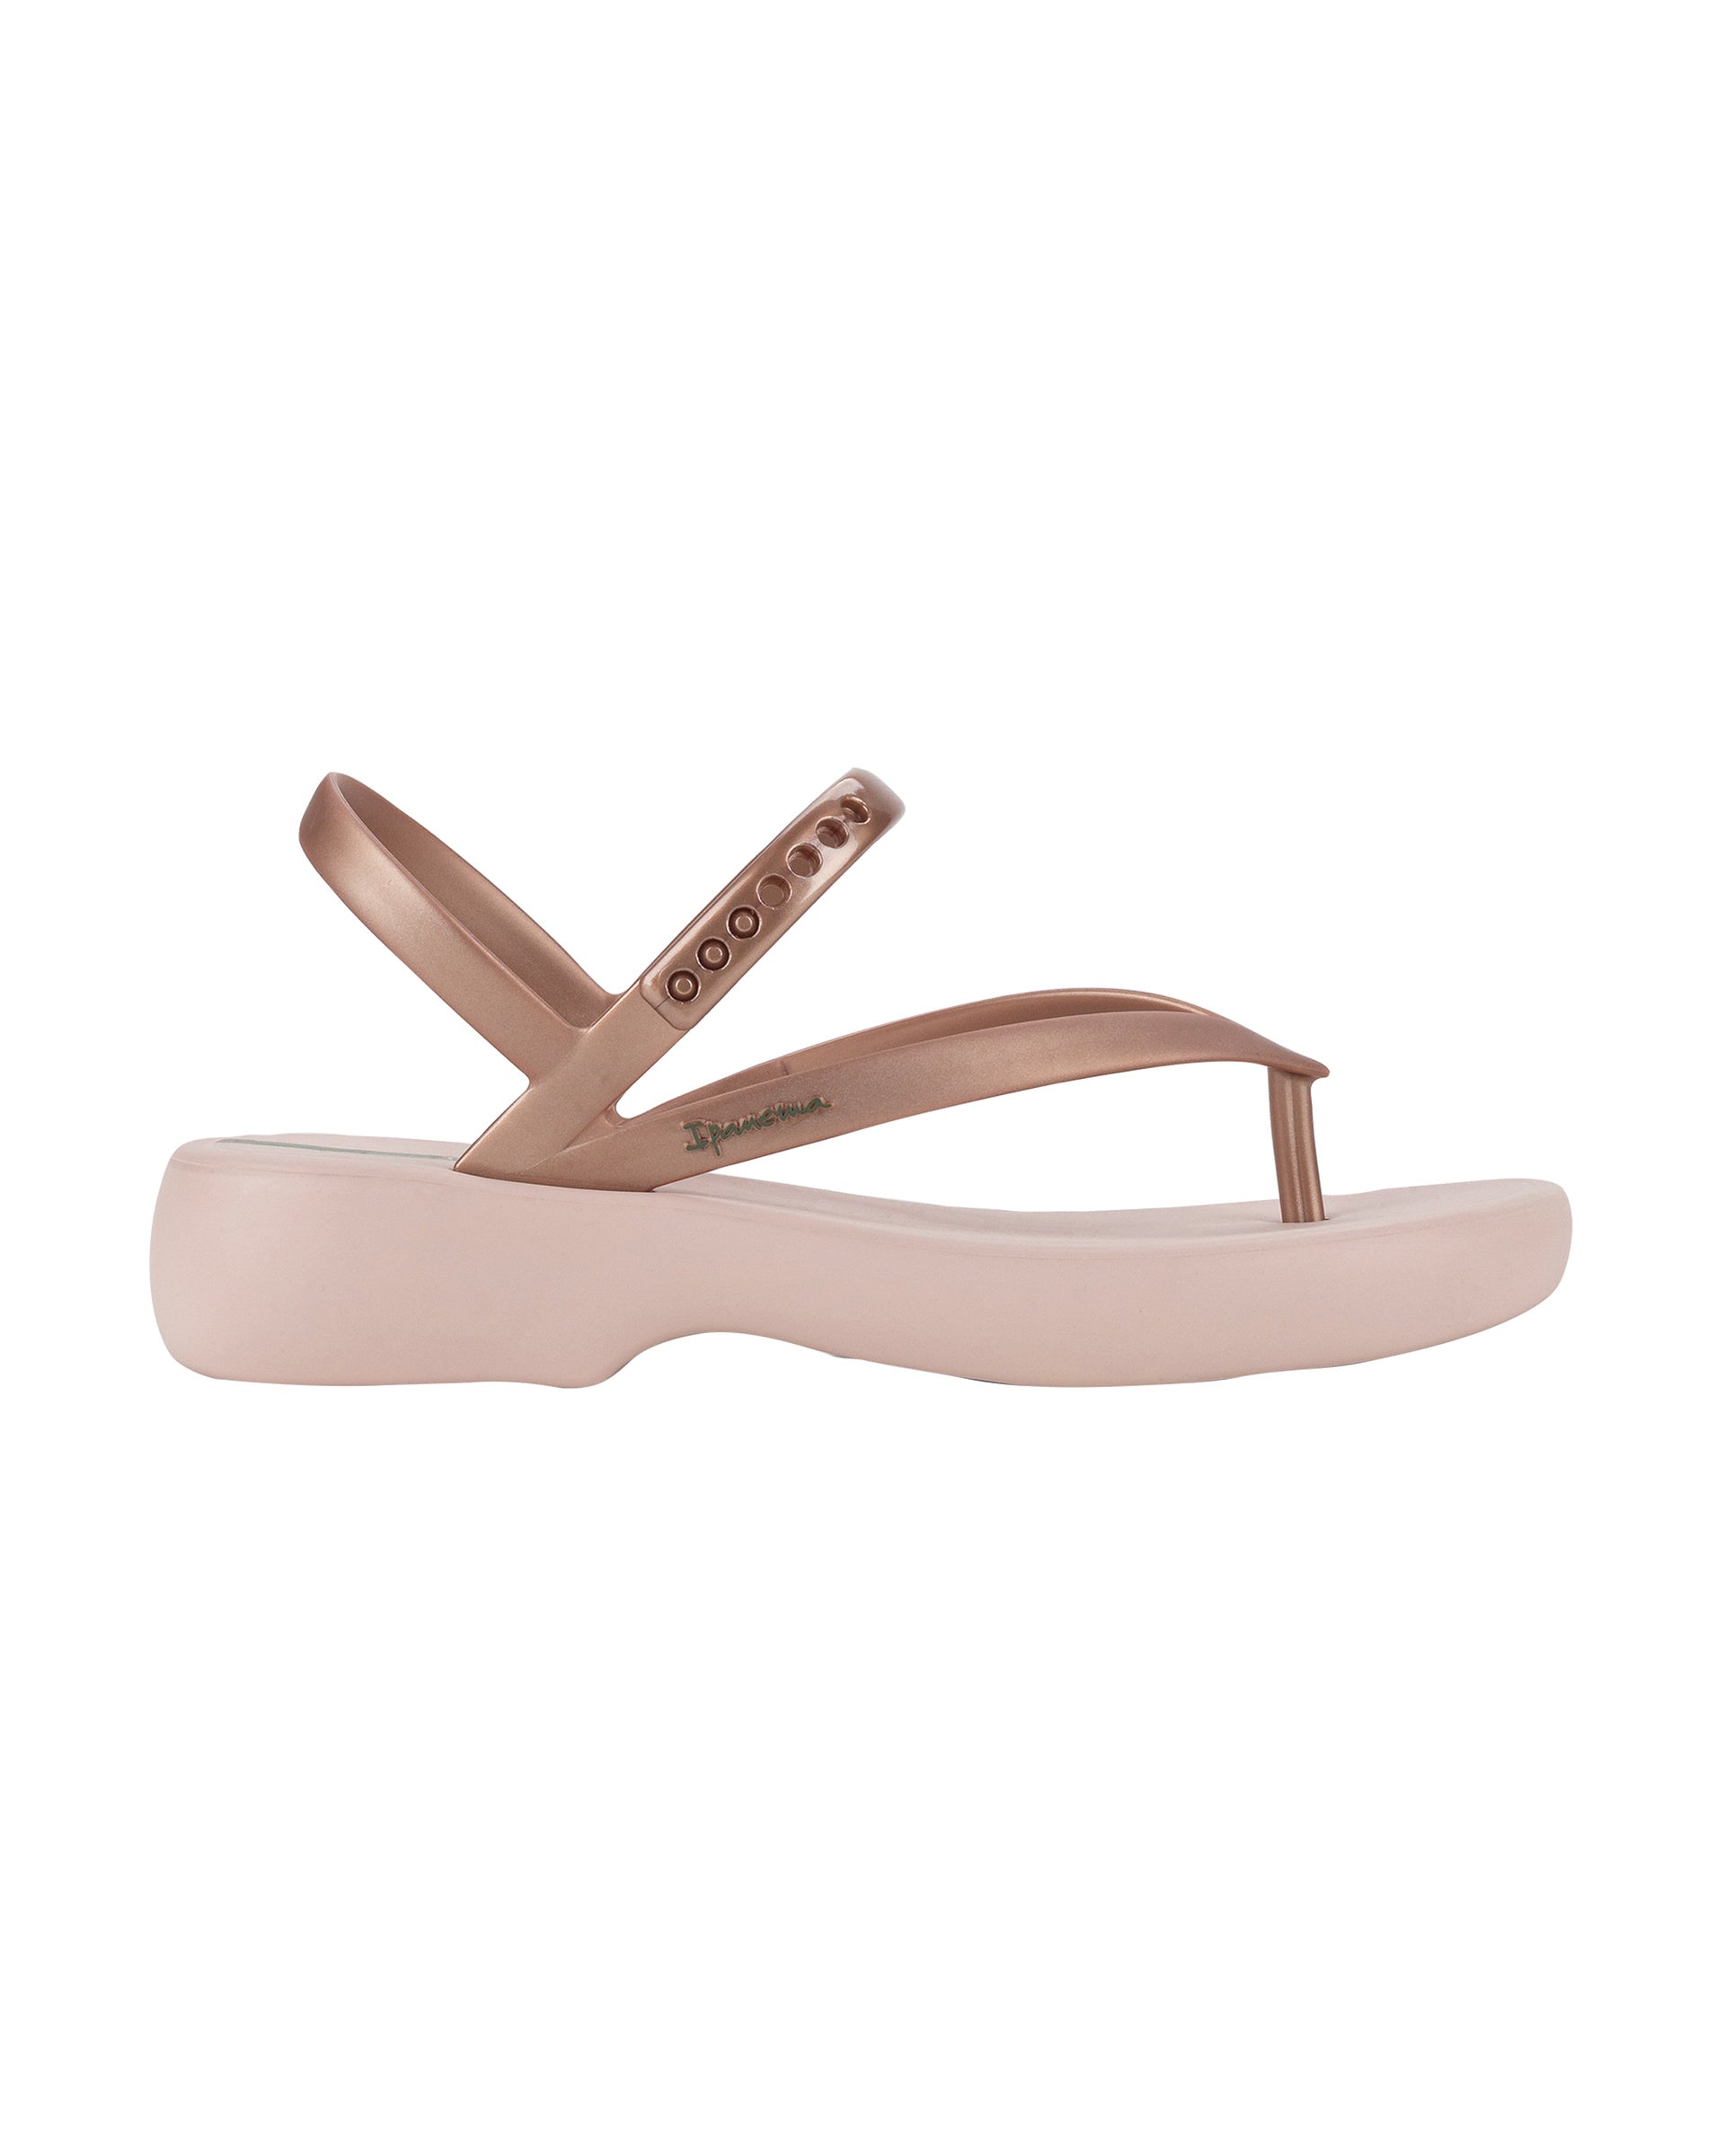 Outer side view of a pink Ipanema Verano women's sandal.